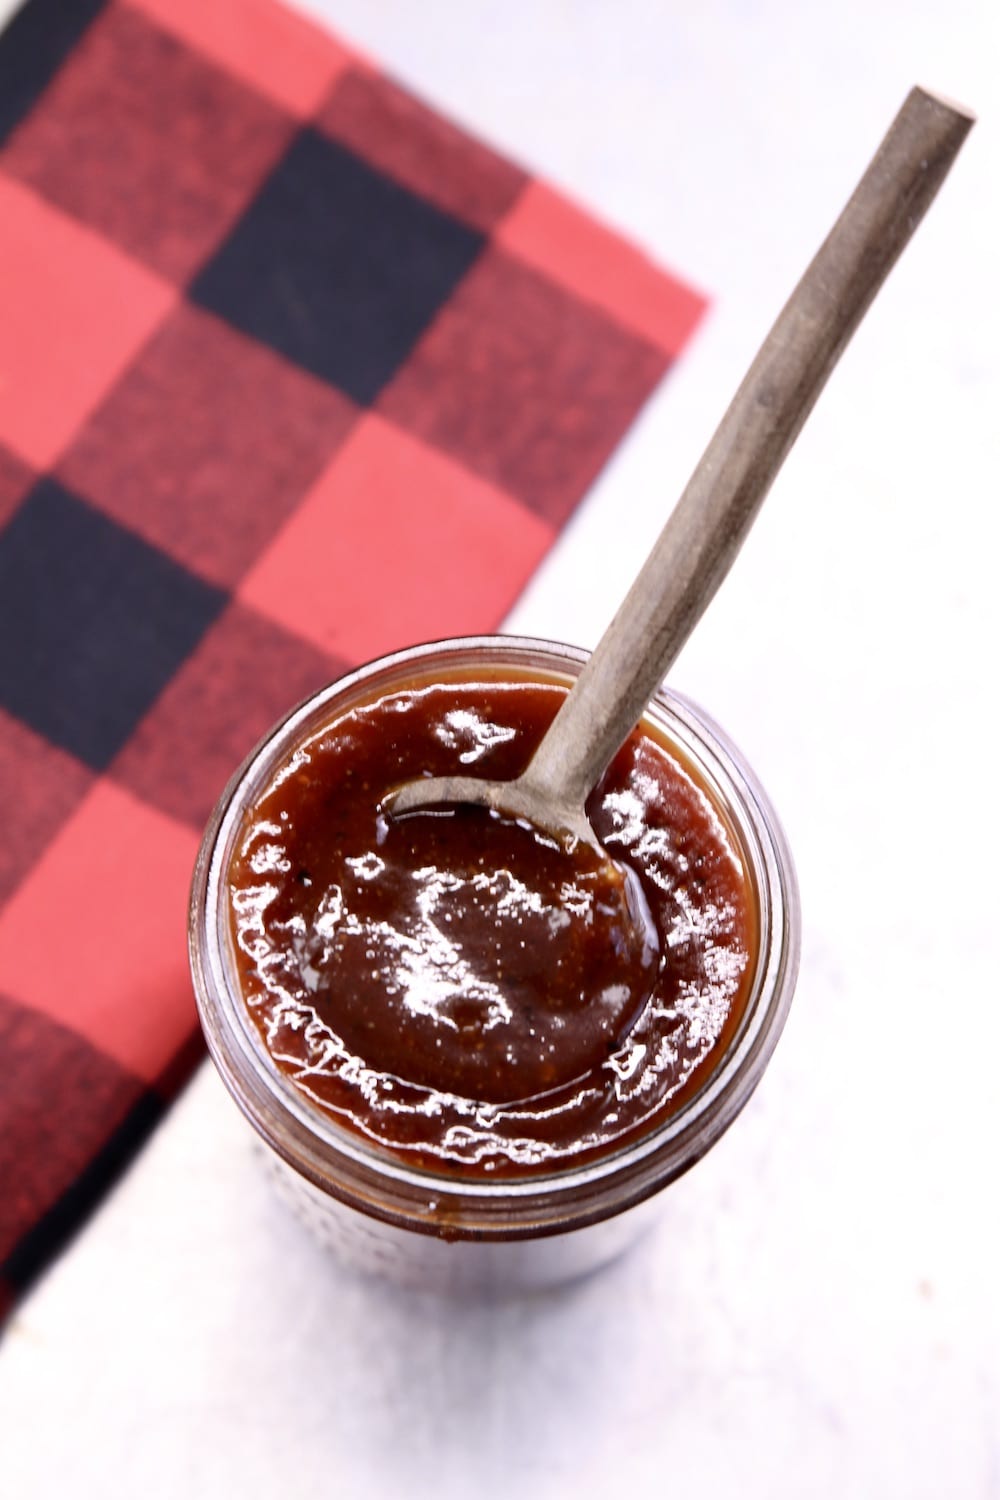 jar of bbq sauce with a wood spoon and buffalo check napkin